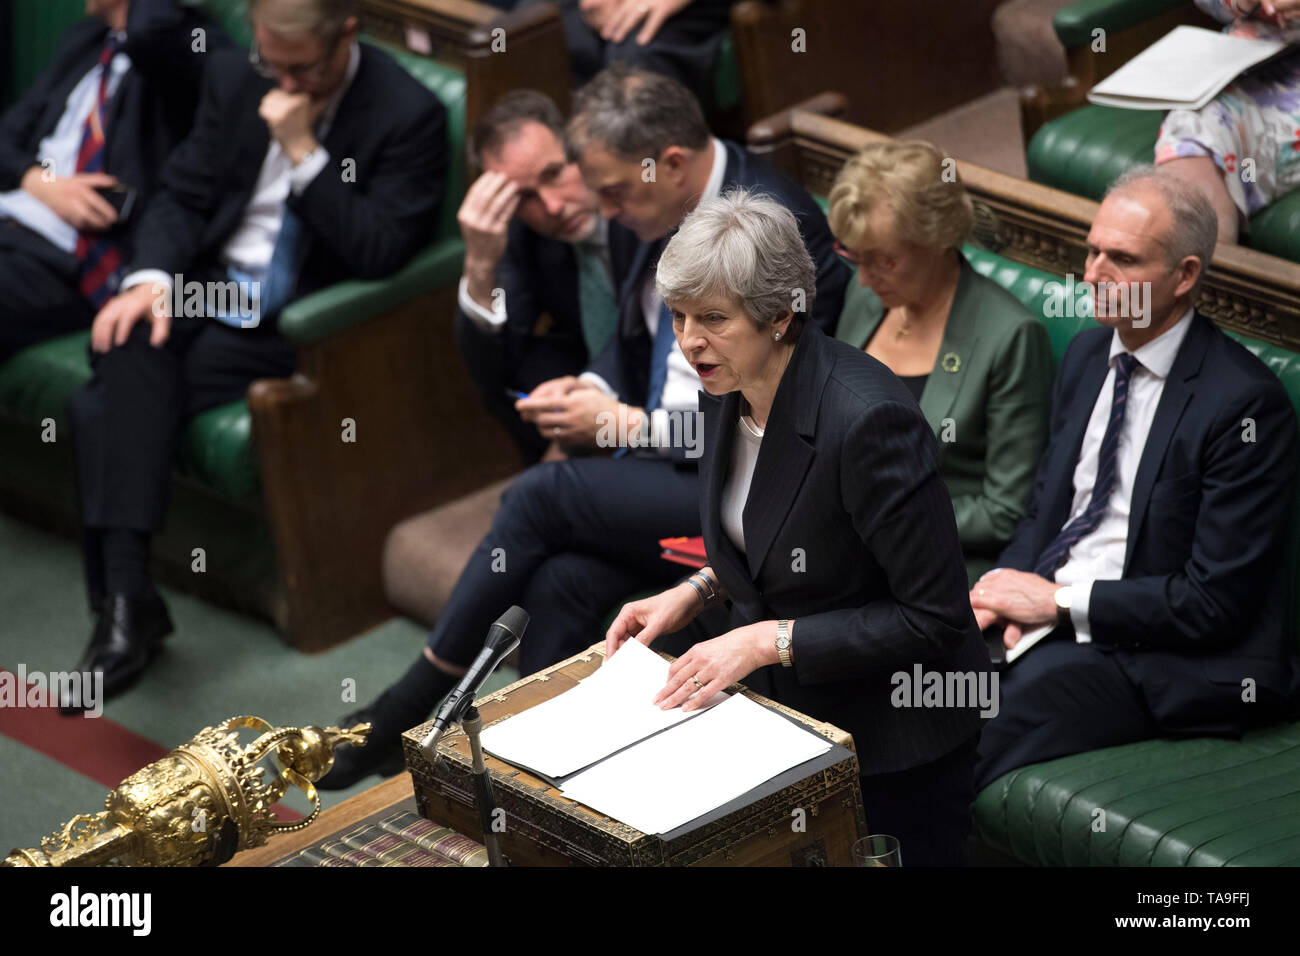 London, Britain. 22nd May, 2019. British Prime Minister Theresa May (front) and the leader of the House of Commons Andrea Leadsom (2nd R, rear) attend the Prime Minister's Questions at the House of Commons in London, Britain, on May 22, 2019. The British leader of the House of Commons Andrea Leadsom on Wednesday resigned amid growing discontent with the prime minster's leadership, one day after the new Brexit agreement backfired. Credit: UK Parliament/Jessica Taylor/Xinhua/Alamy Live News Stock Photo